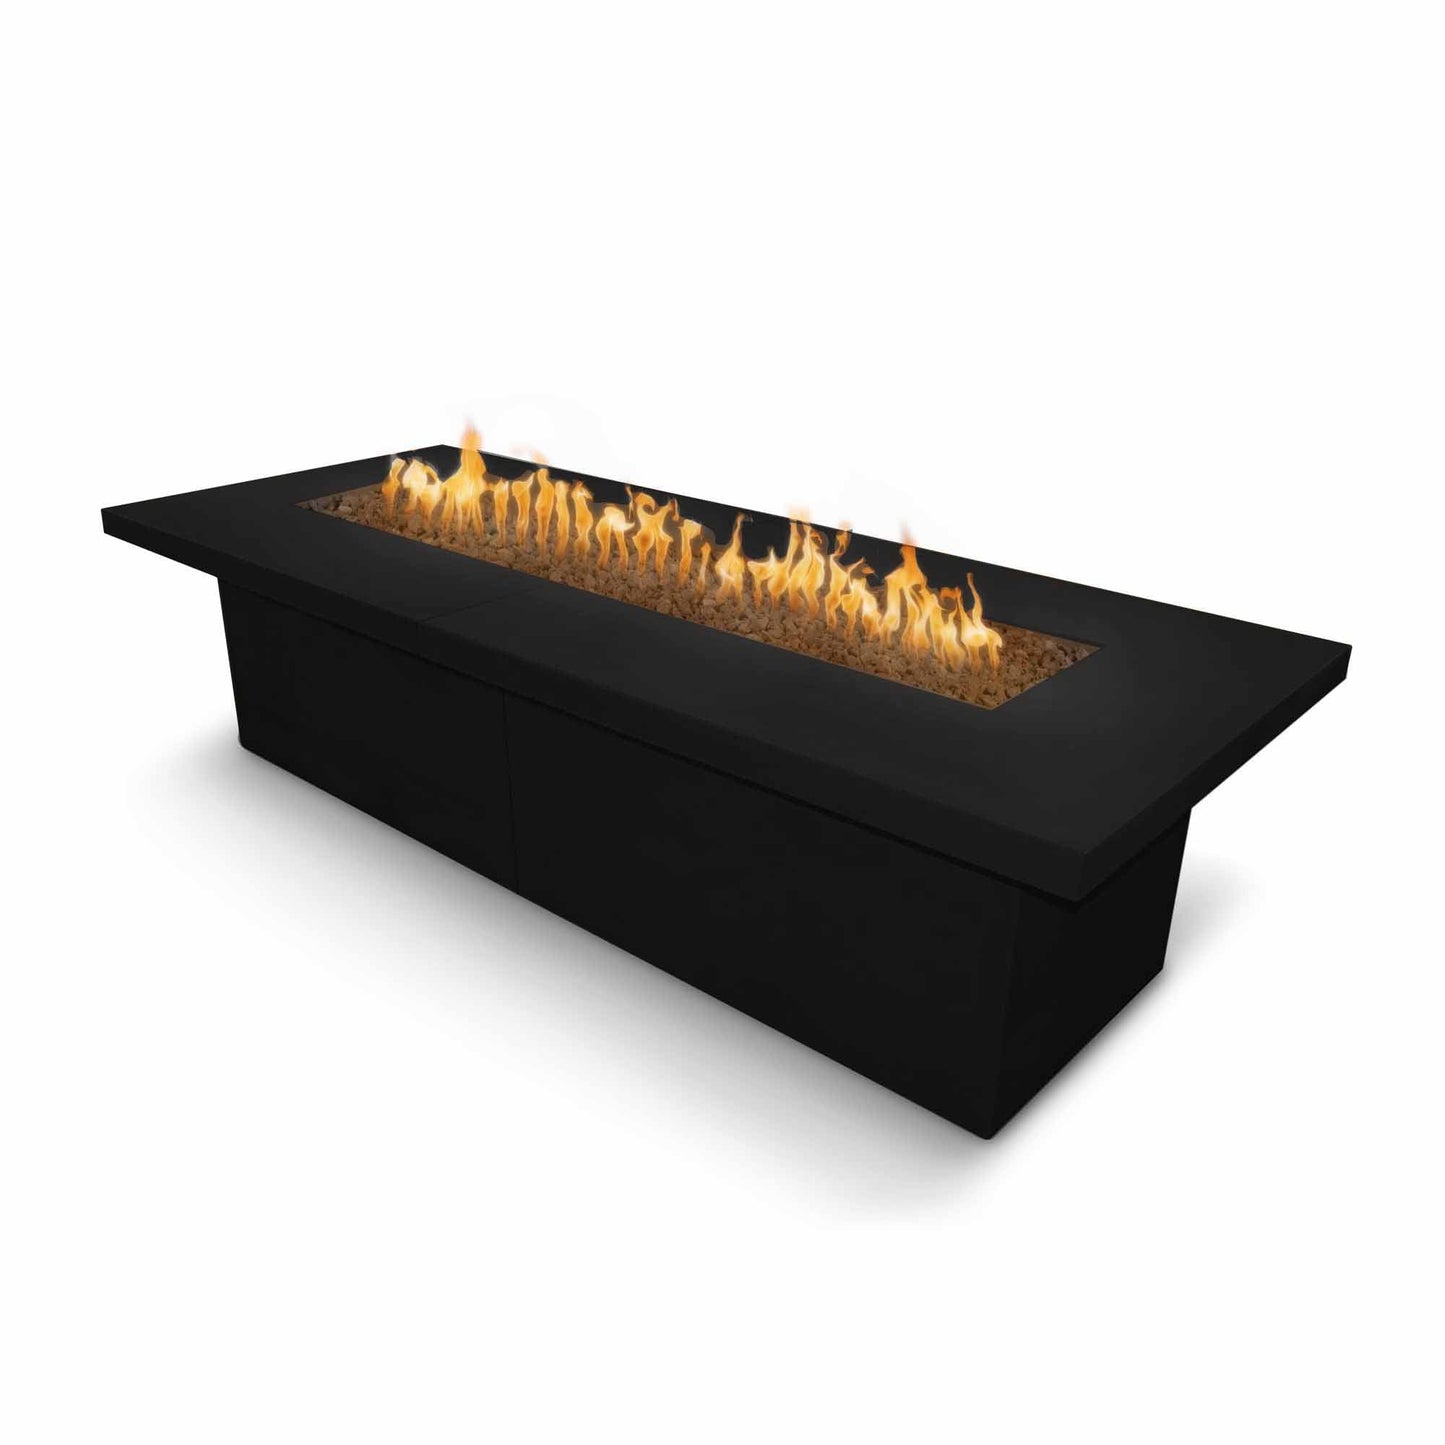 The Outdoor Plus Rectangular Newport 120" Stainless Steel Liquid Propane Fire Pit with Flame Sense with Spark Ignition